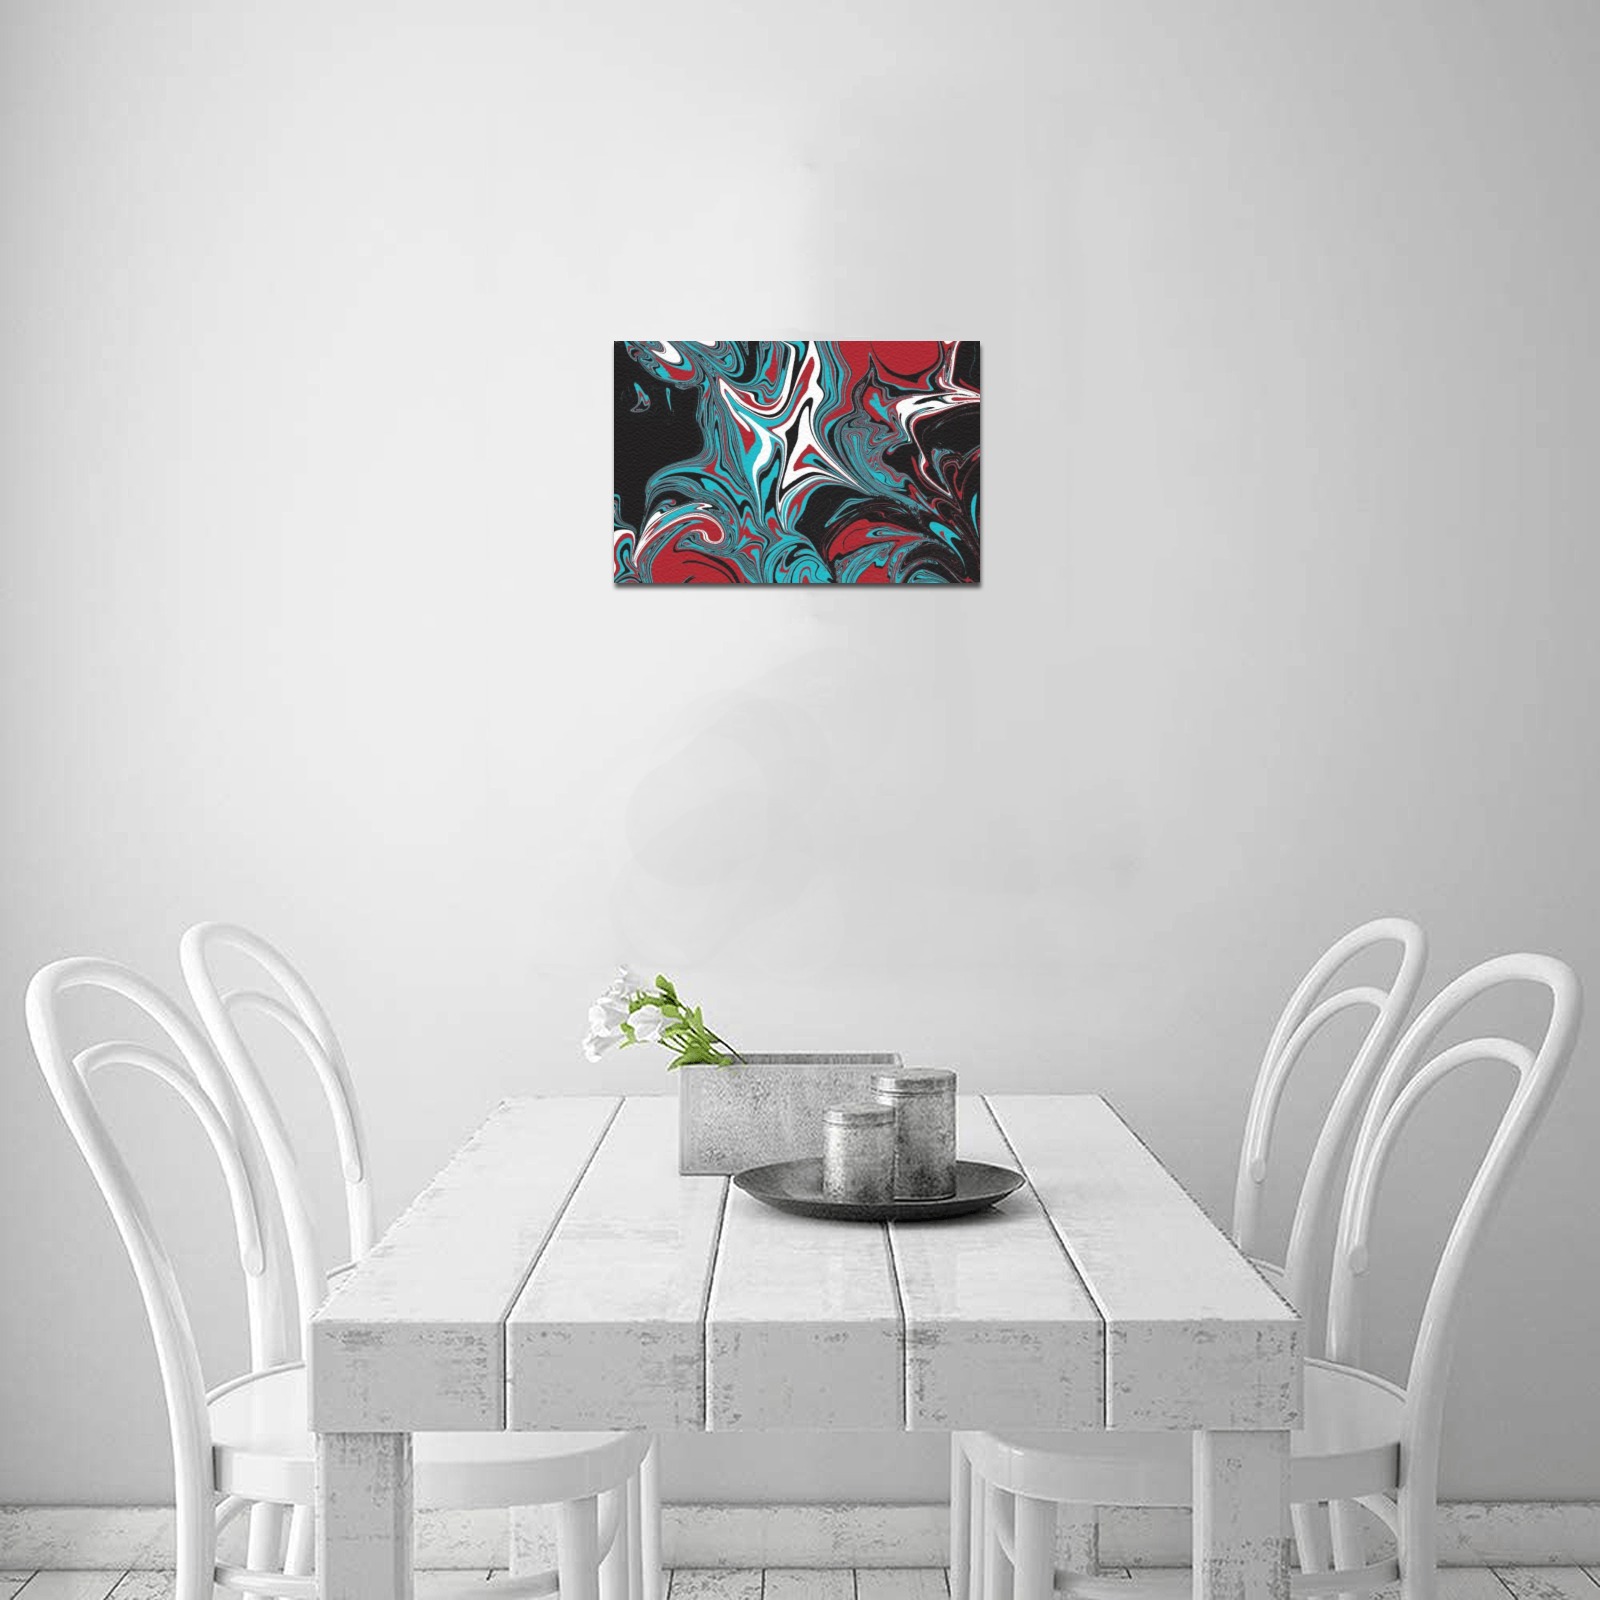 Dark Wave of Colors Upgraded Canvas Print 12"x8"